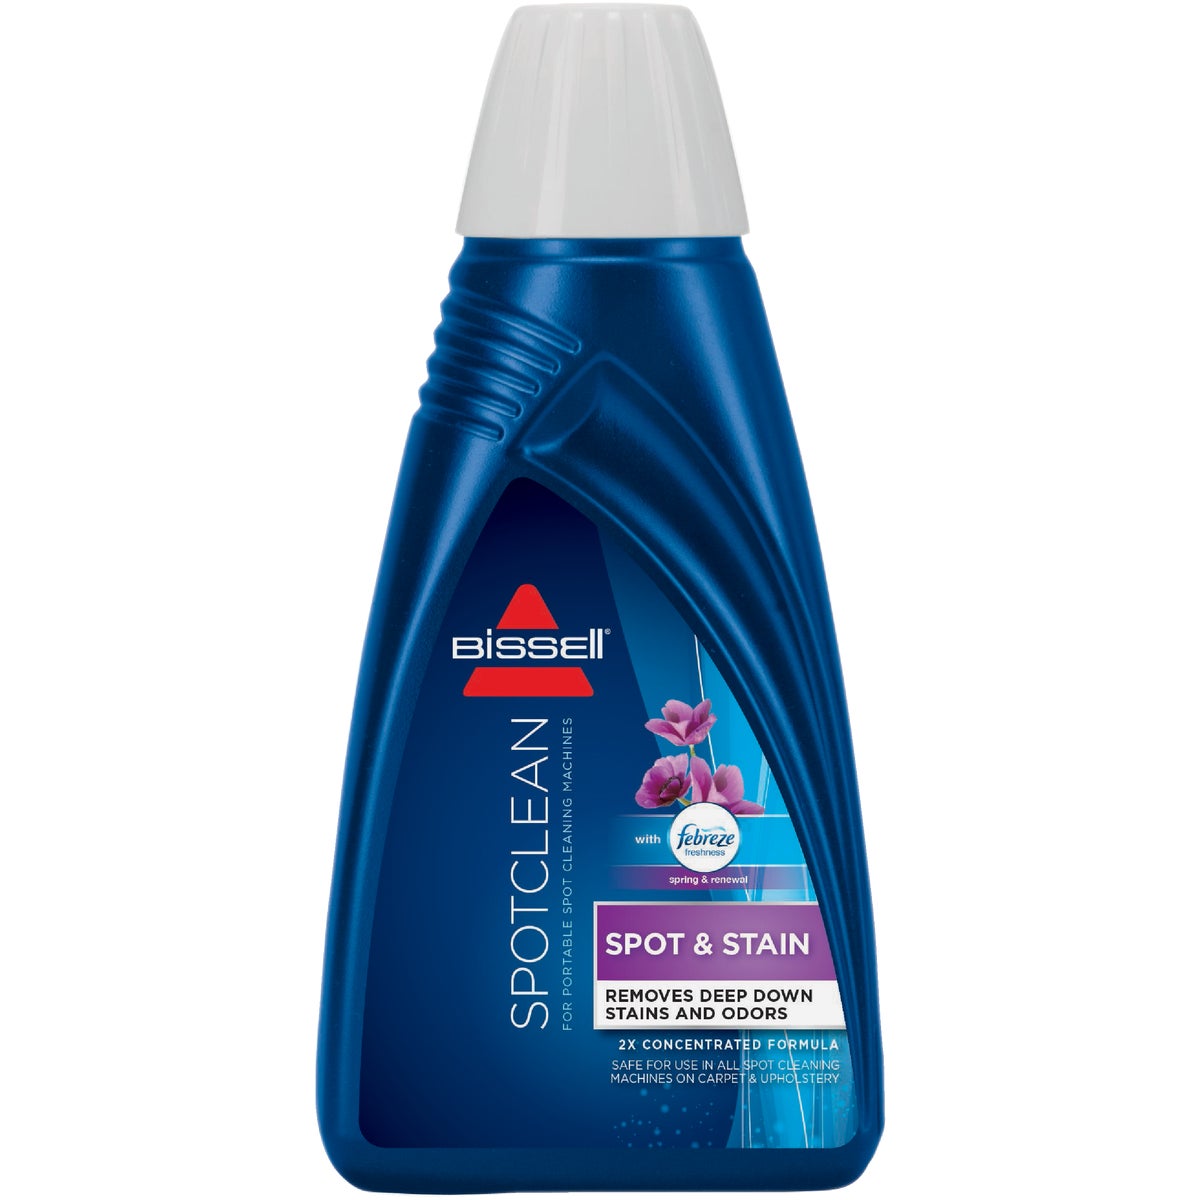 Bissell SpotClean 32 Oz. Febreze Spring & Renewal Spot & Stain Remover